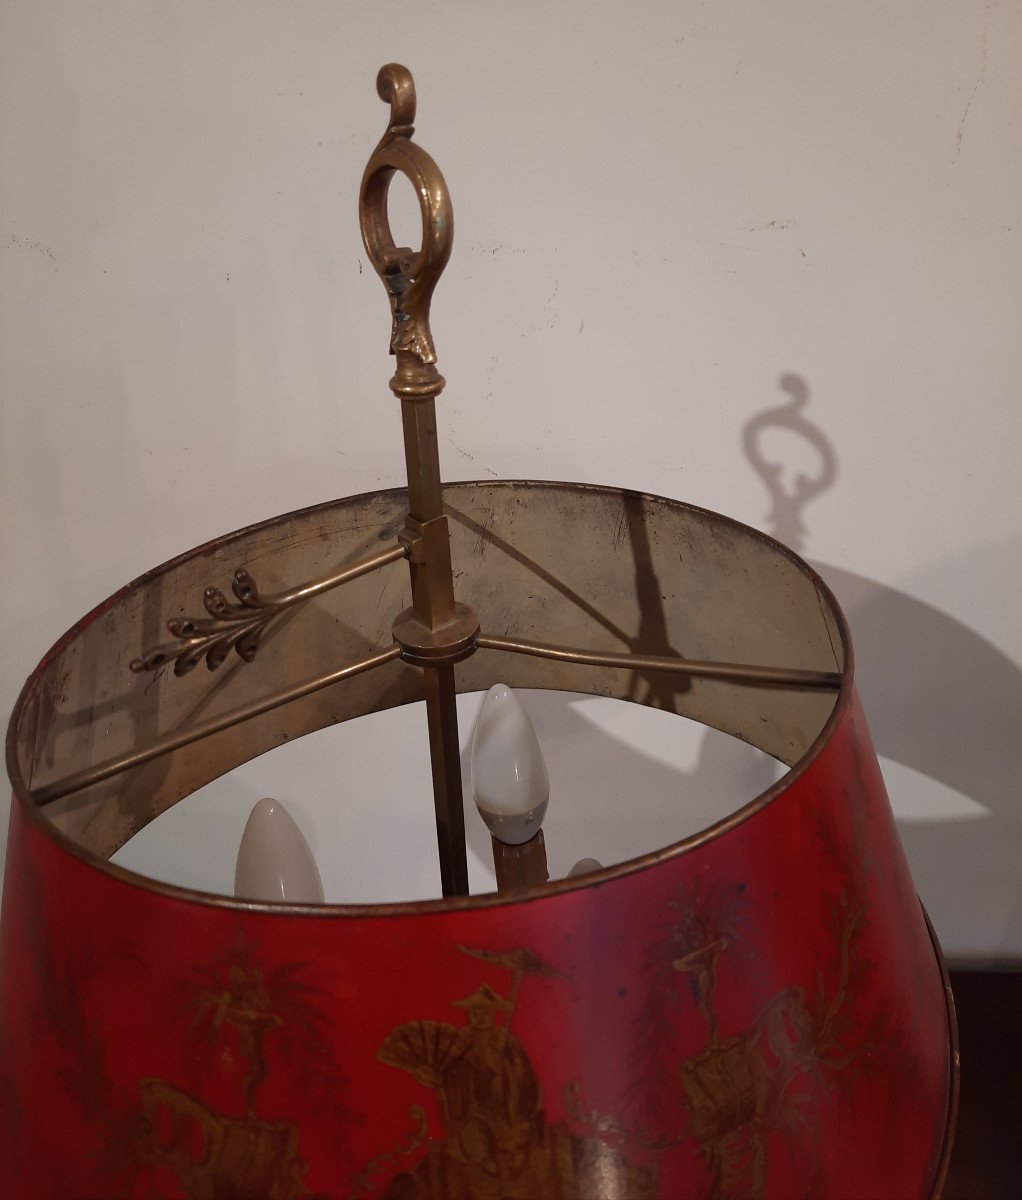 Bouillotte Lamp With Three Lights, Capped With A Red Painted Lampshade, 19th Century Period.-photo-4